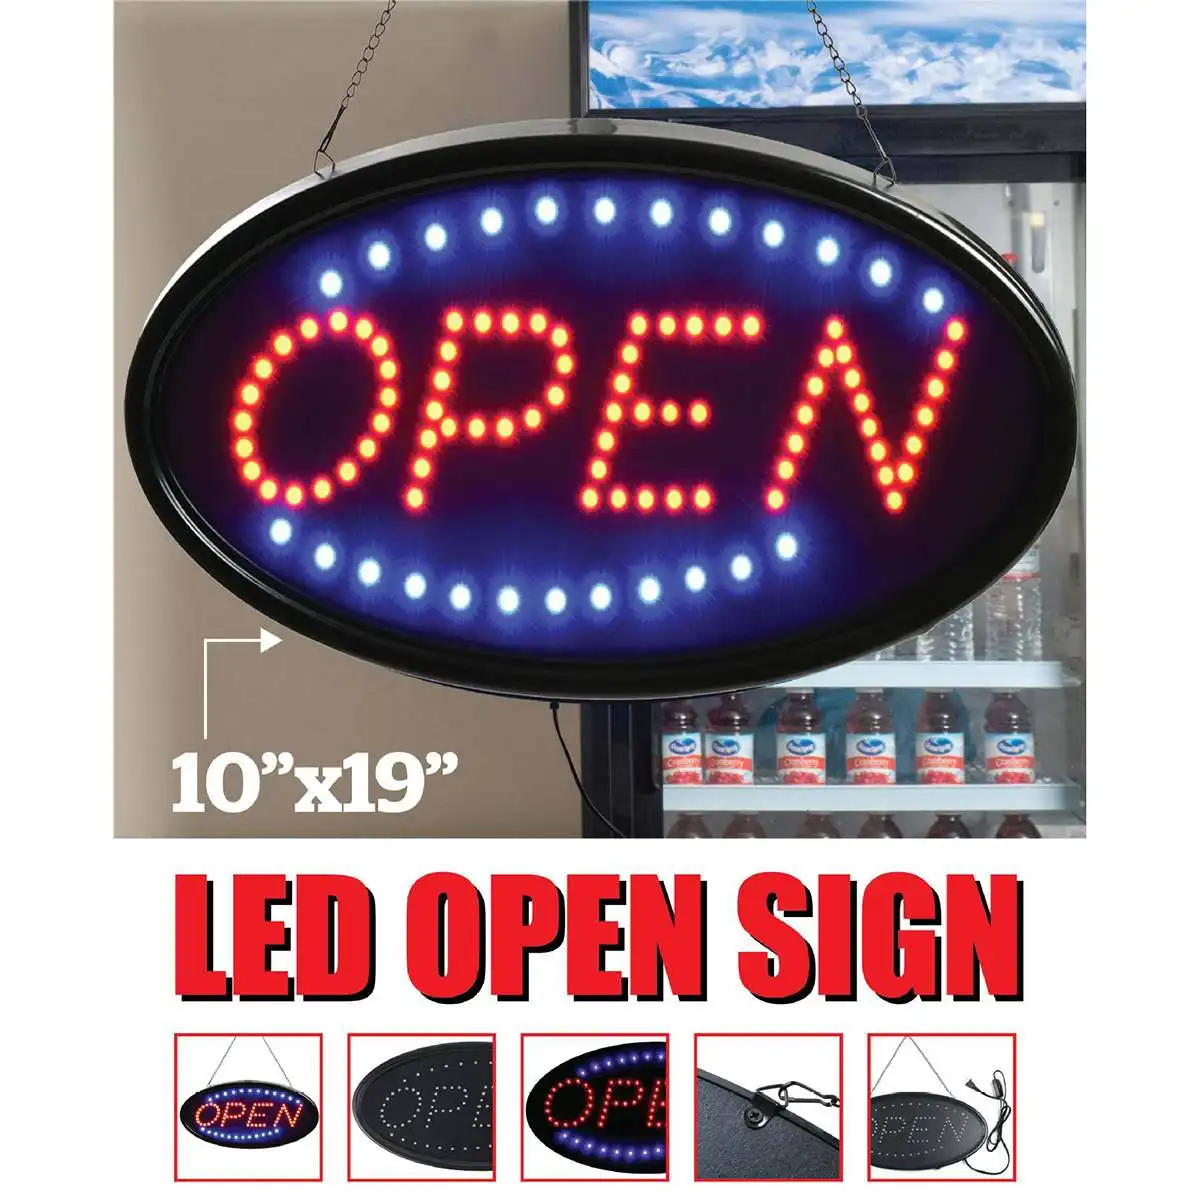 Peircing Neon Look LED Technology Animated Store Window Sign 6.5 x 26in